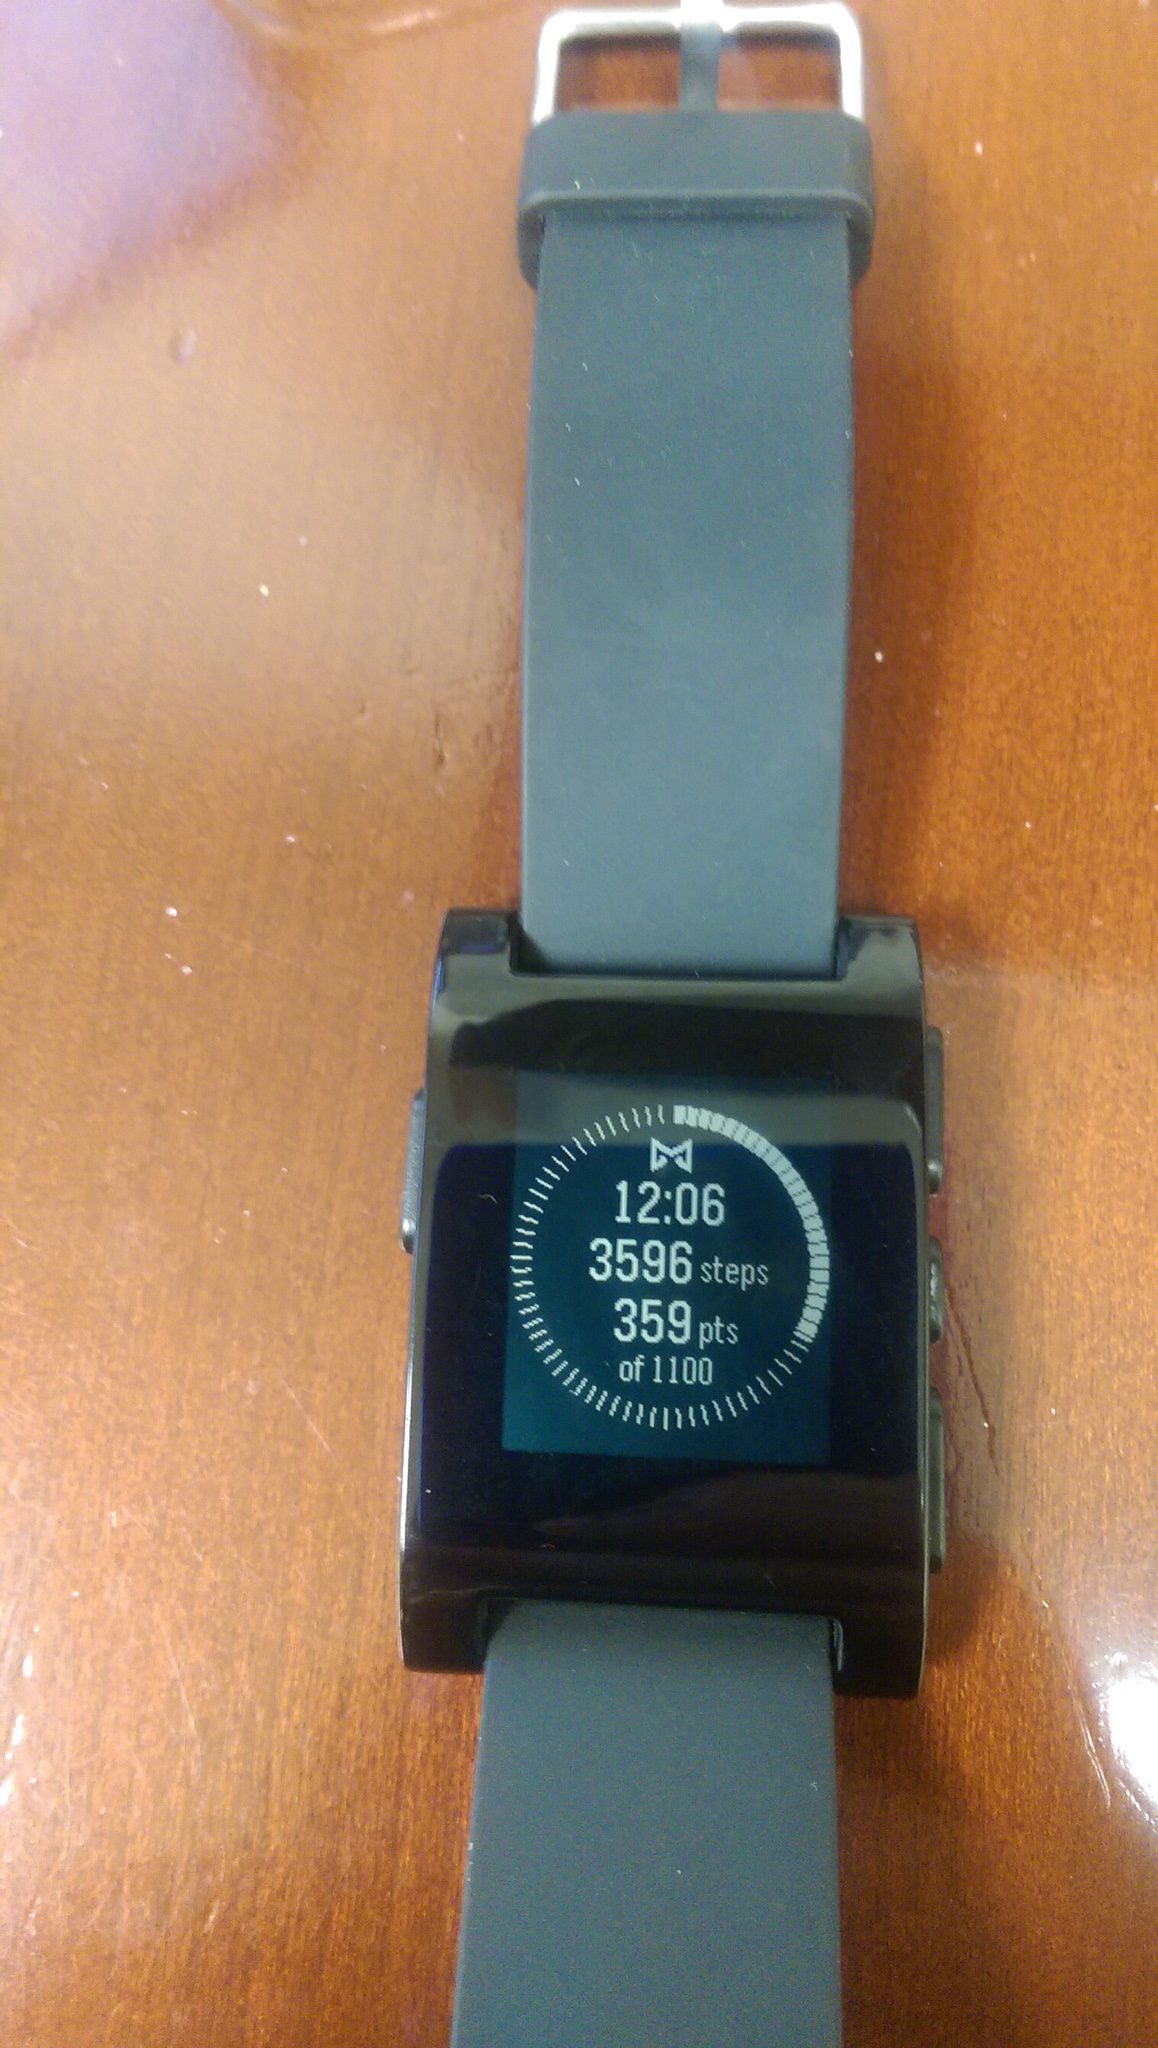 5 Reasons Why Pebble Makes a Fantastic "Jack of all Trades" Fitness Device